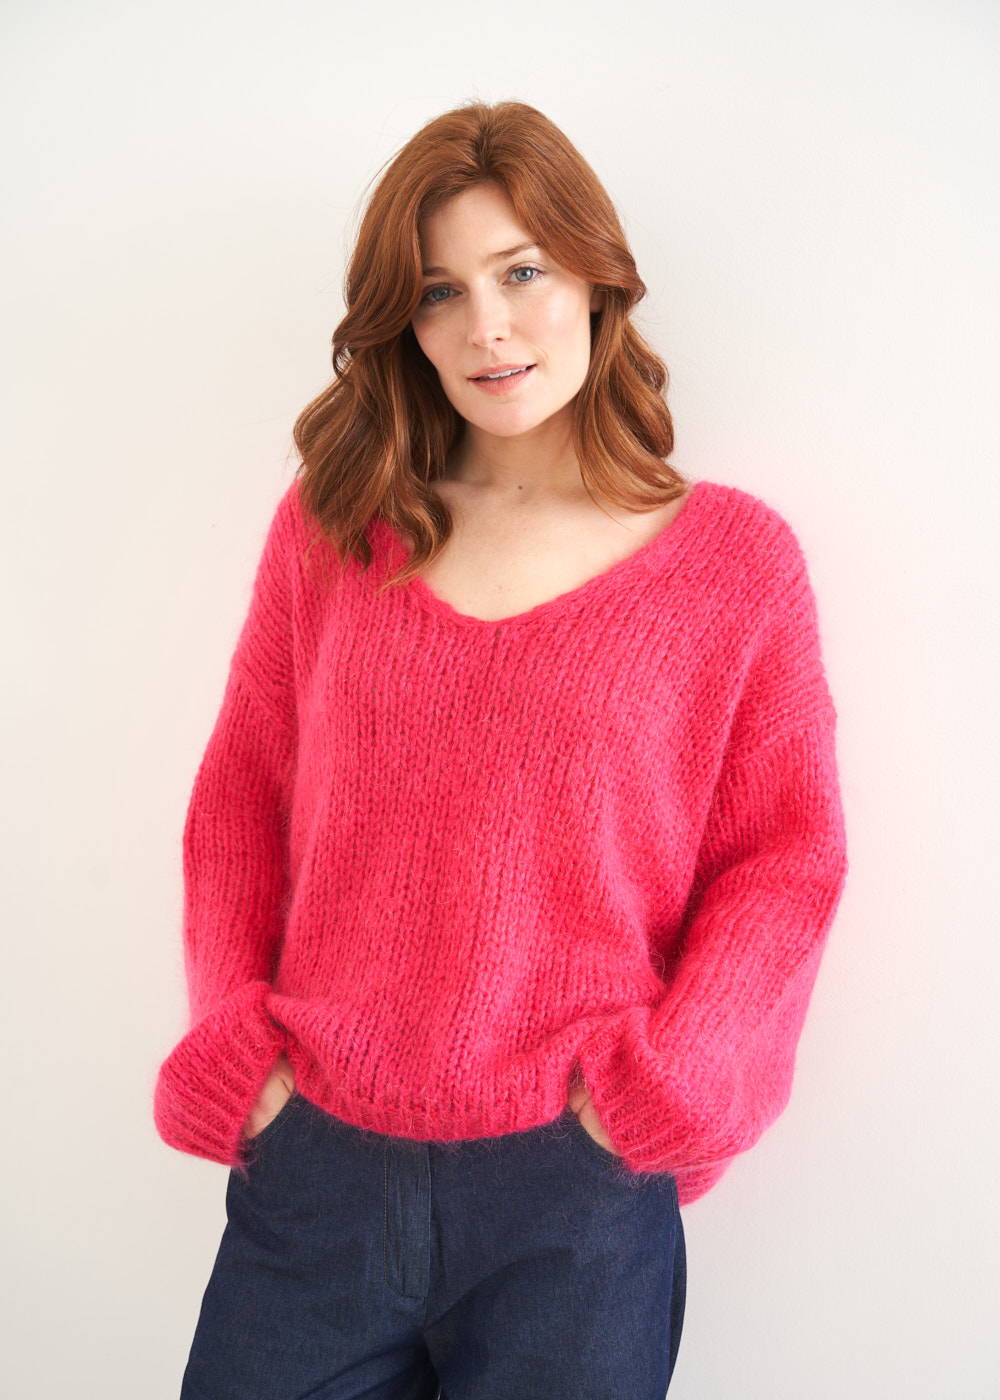 A model wearing a pink knitted v neck sweater with blue chambray jeans